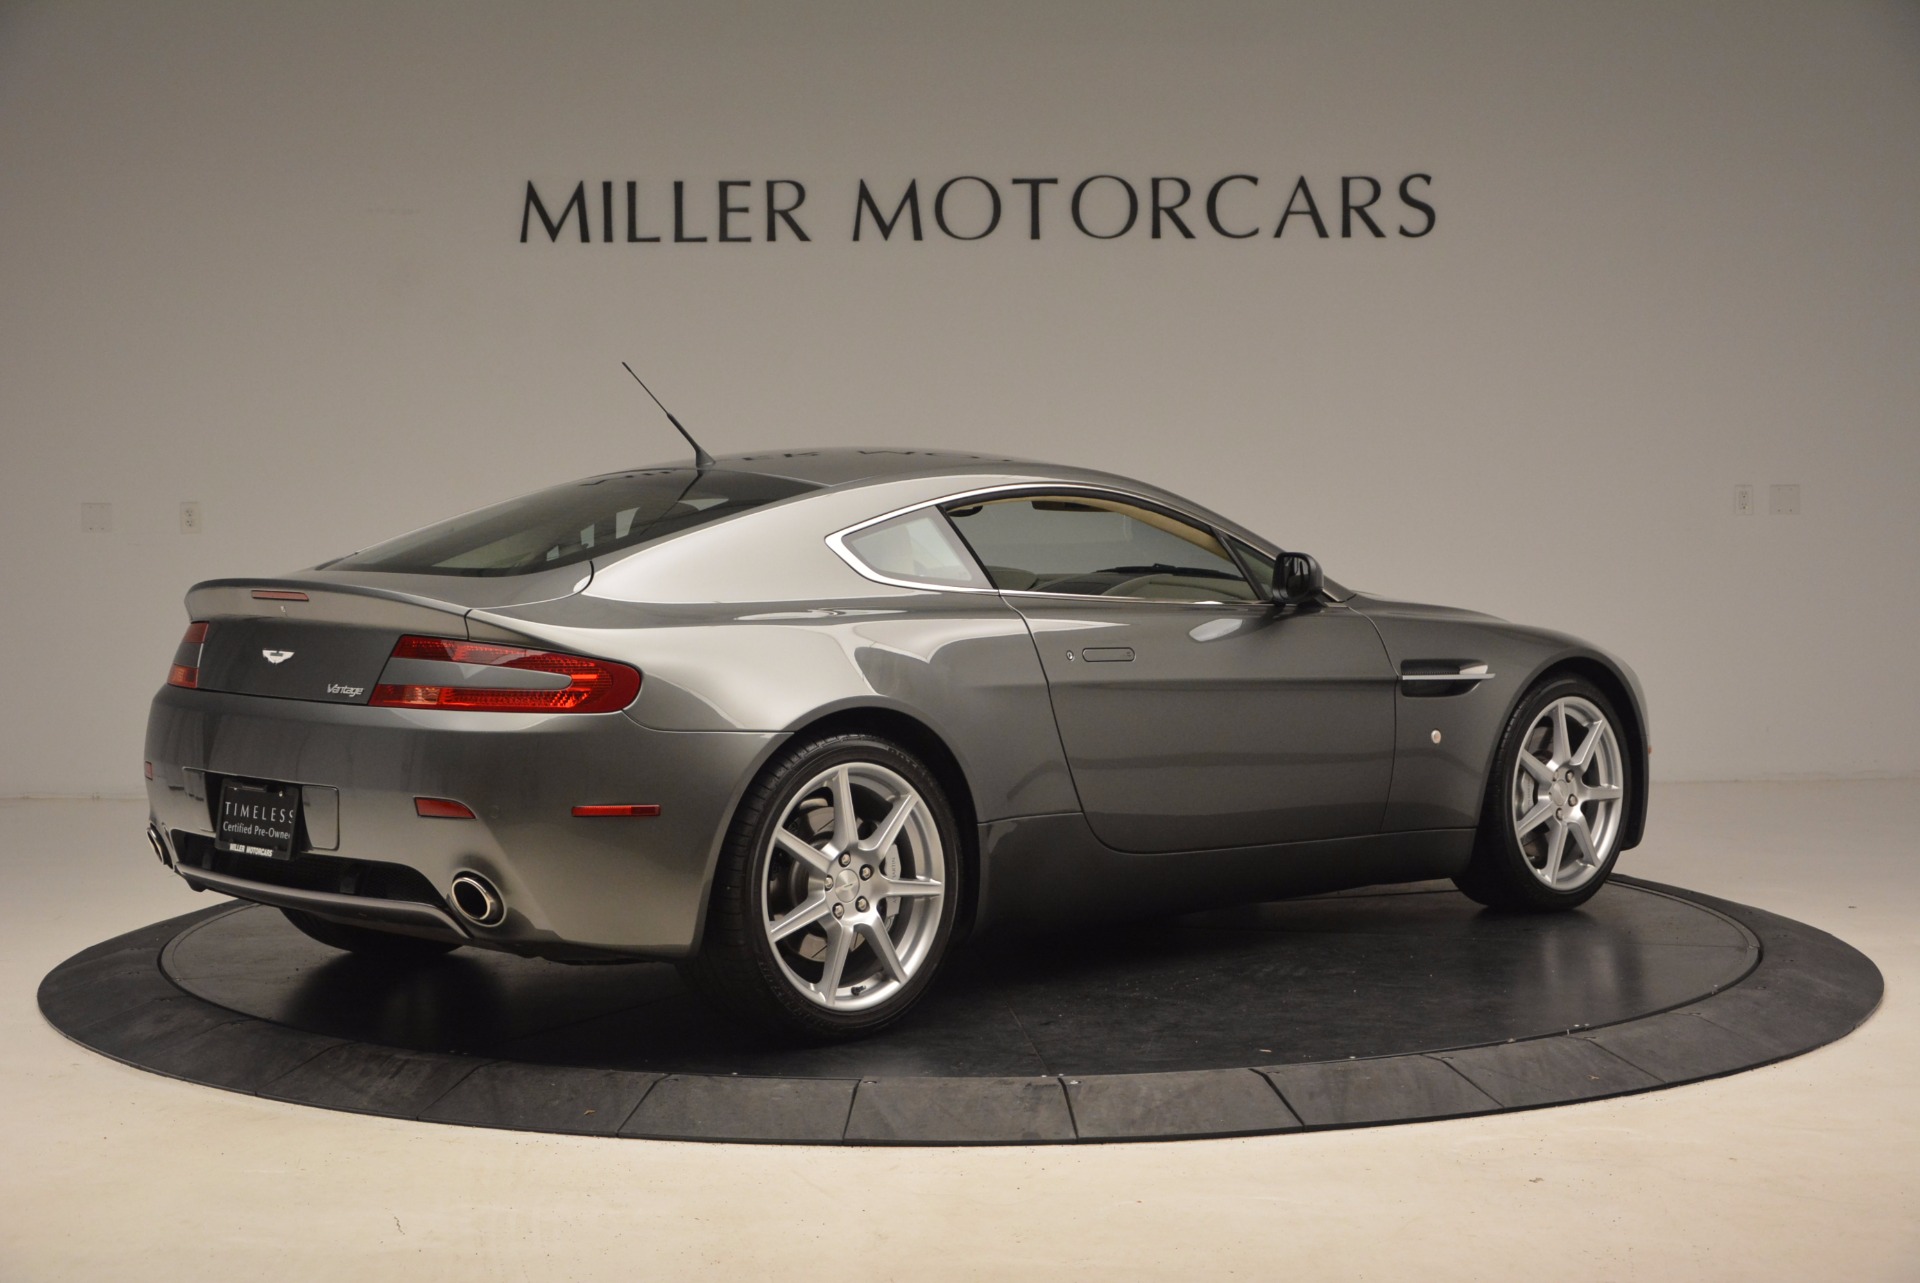 Experience Luxury And Power With The 2006 Aston Martin V8 Vantage